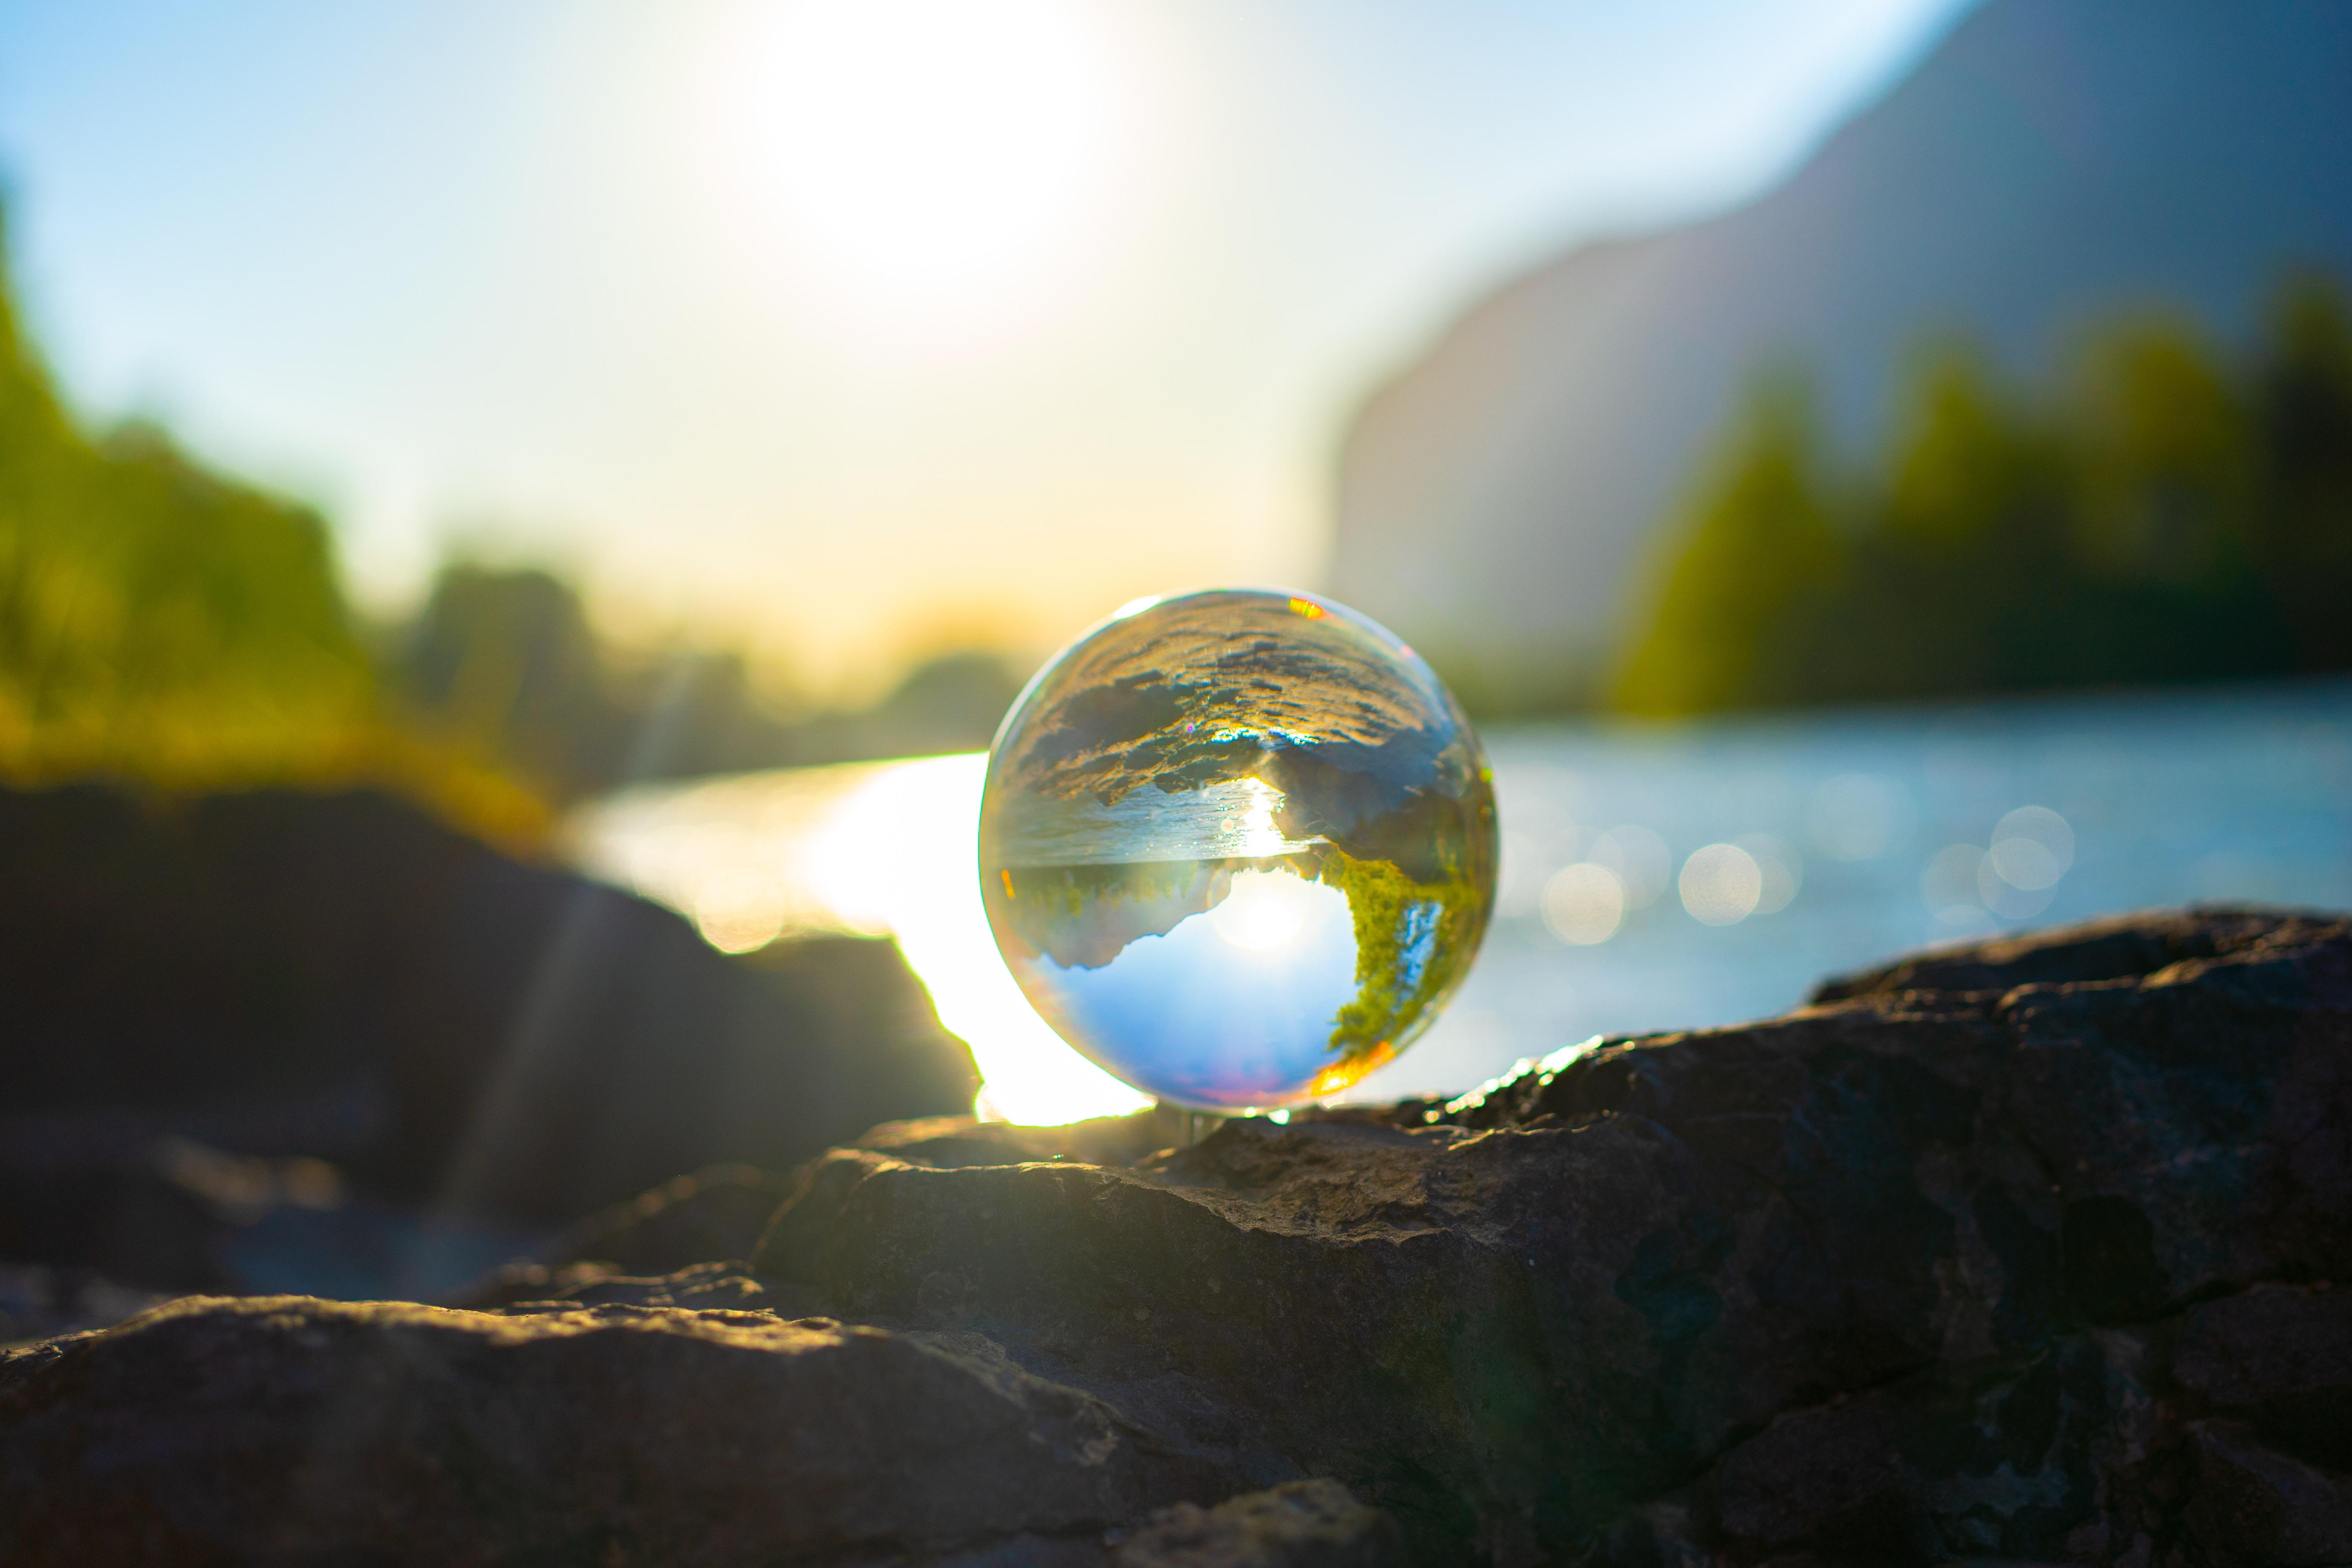 A clear glass ball reflecting the landscape.